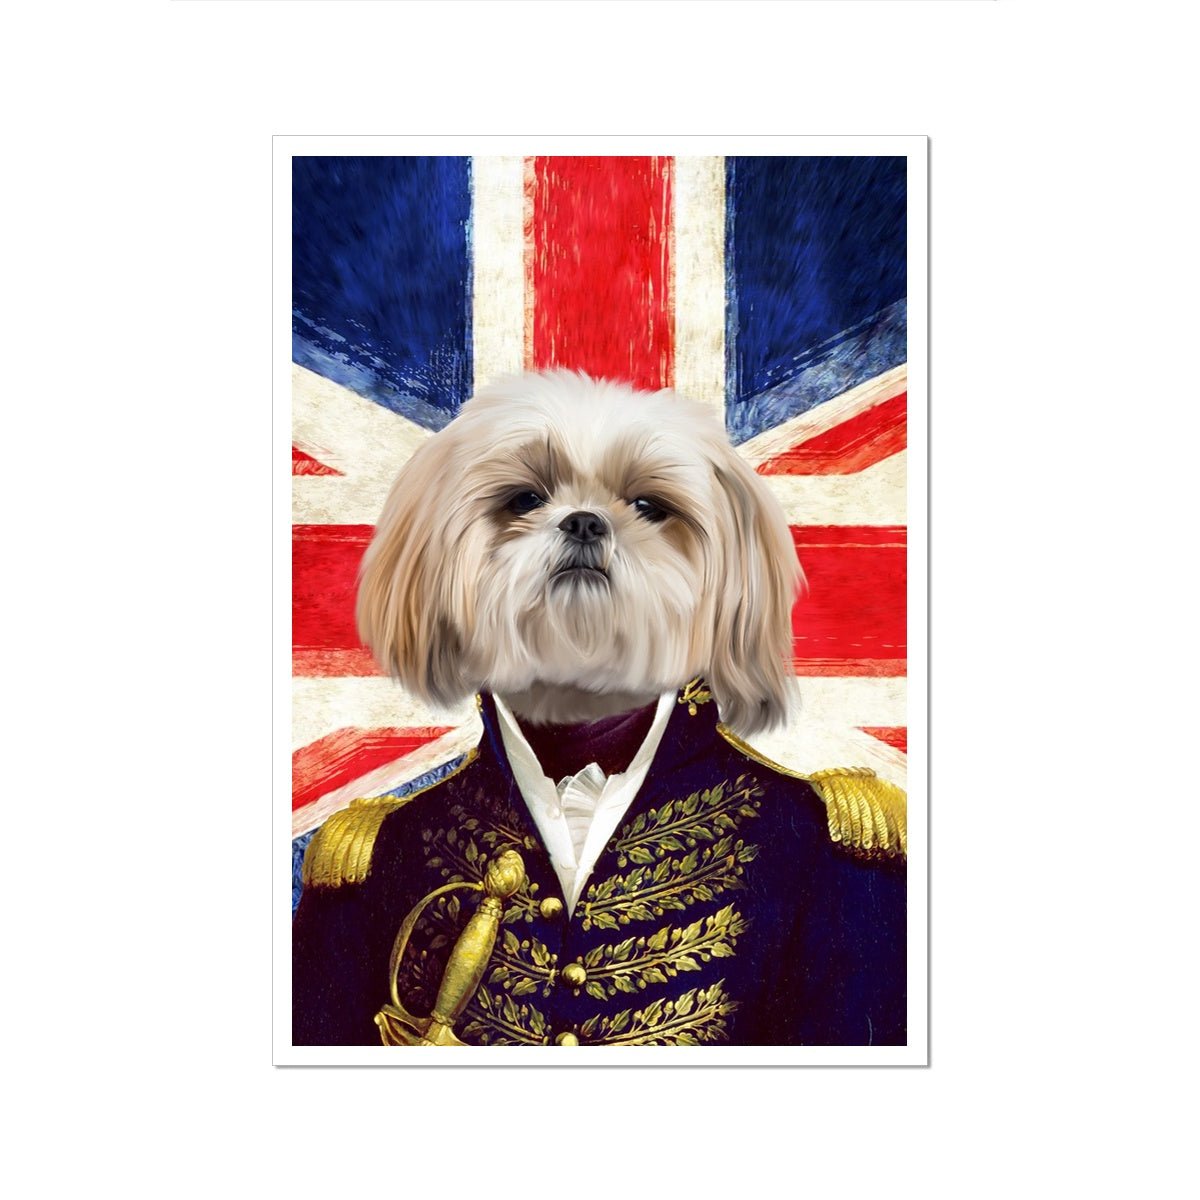 The General - British Flag Edition: Custom Pet Poster - Paw & Glory - #pet portraits# - #dog portraits# - #pet portraits uk#Paw & Glory, paw and glory, crown and paw alternative dog poster custom painting with dog, puppy painting pet portraits near me, procreate pet portrait pet portrait